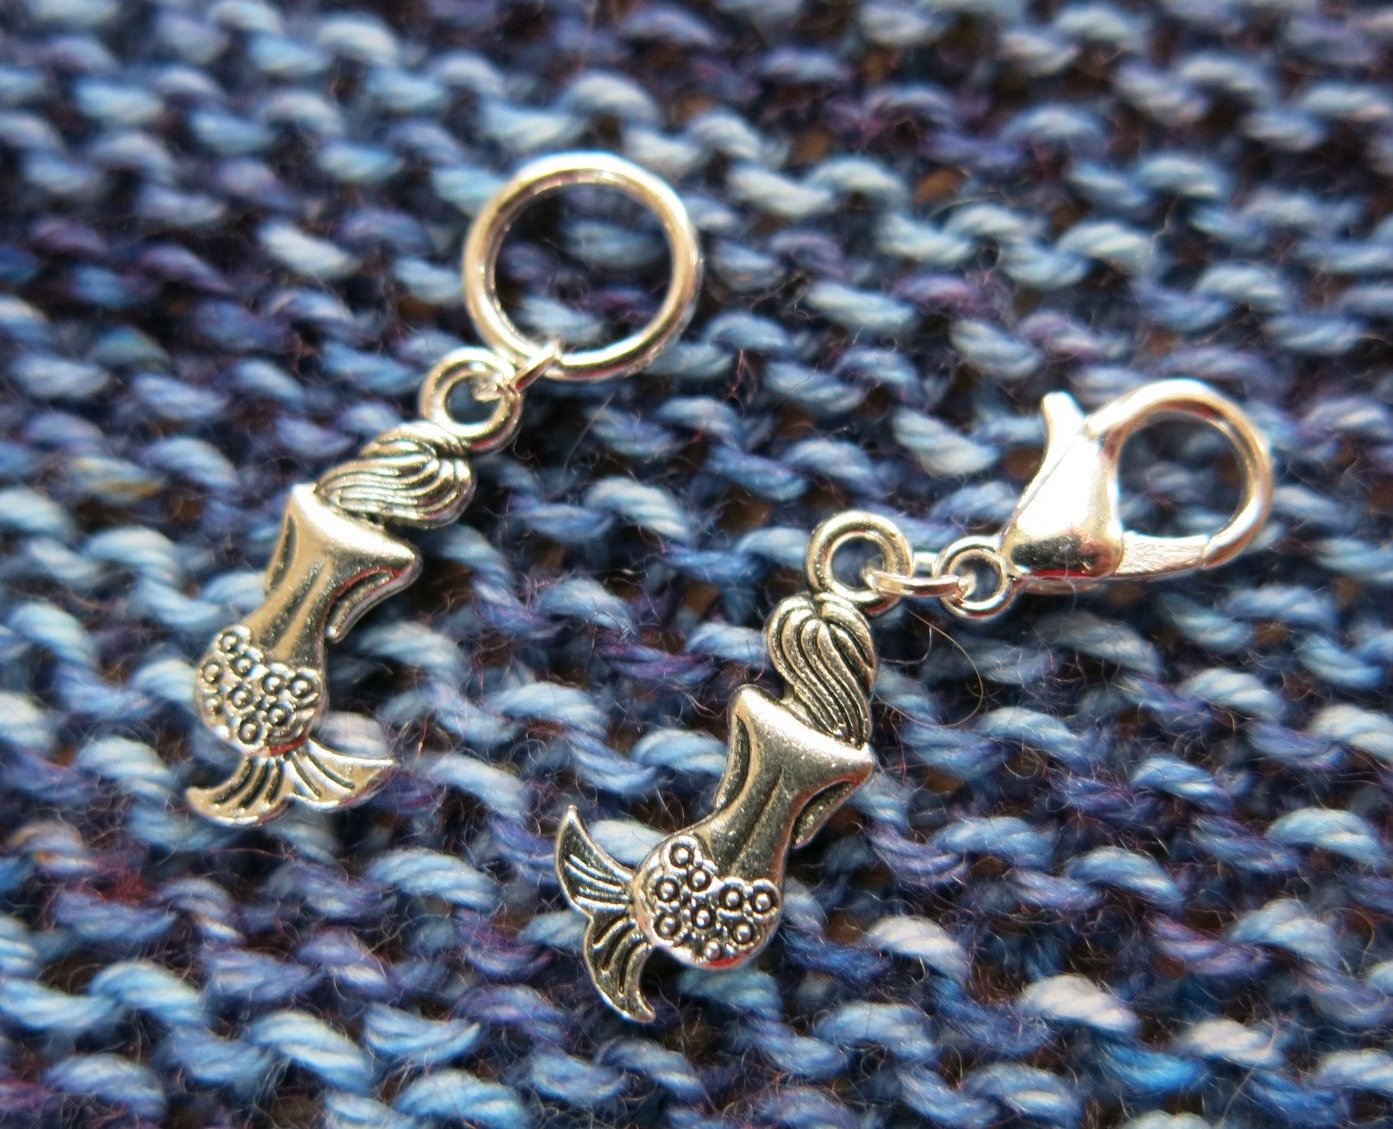 mermaid siren progress keeper stitch markers for knitting and crochet